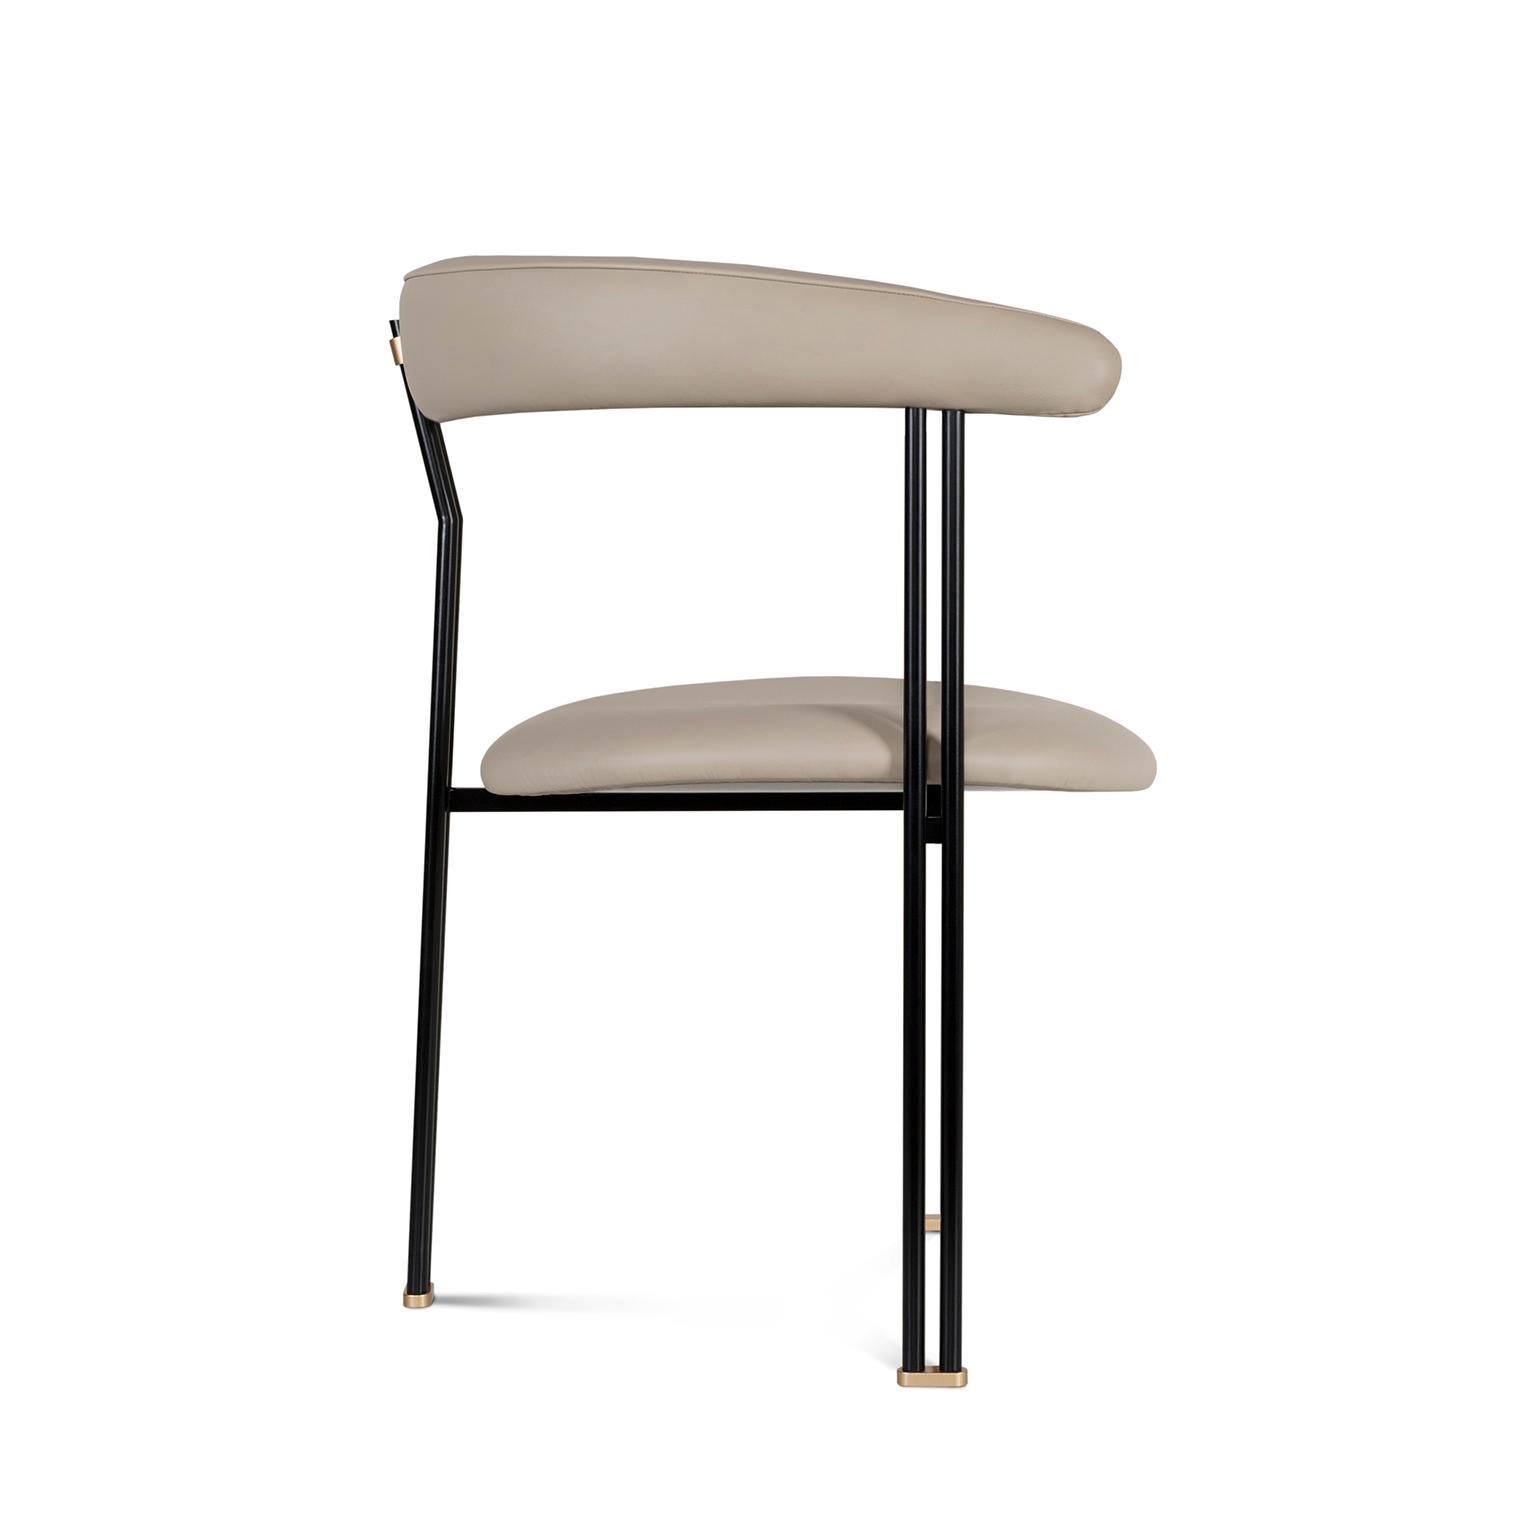 Hand-Crafted Modern Maia Dining Chair, Beige Italian Leather, Handmade Portugal by Greenapple For Sale